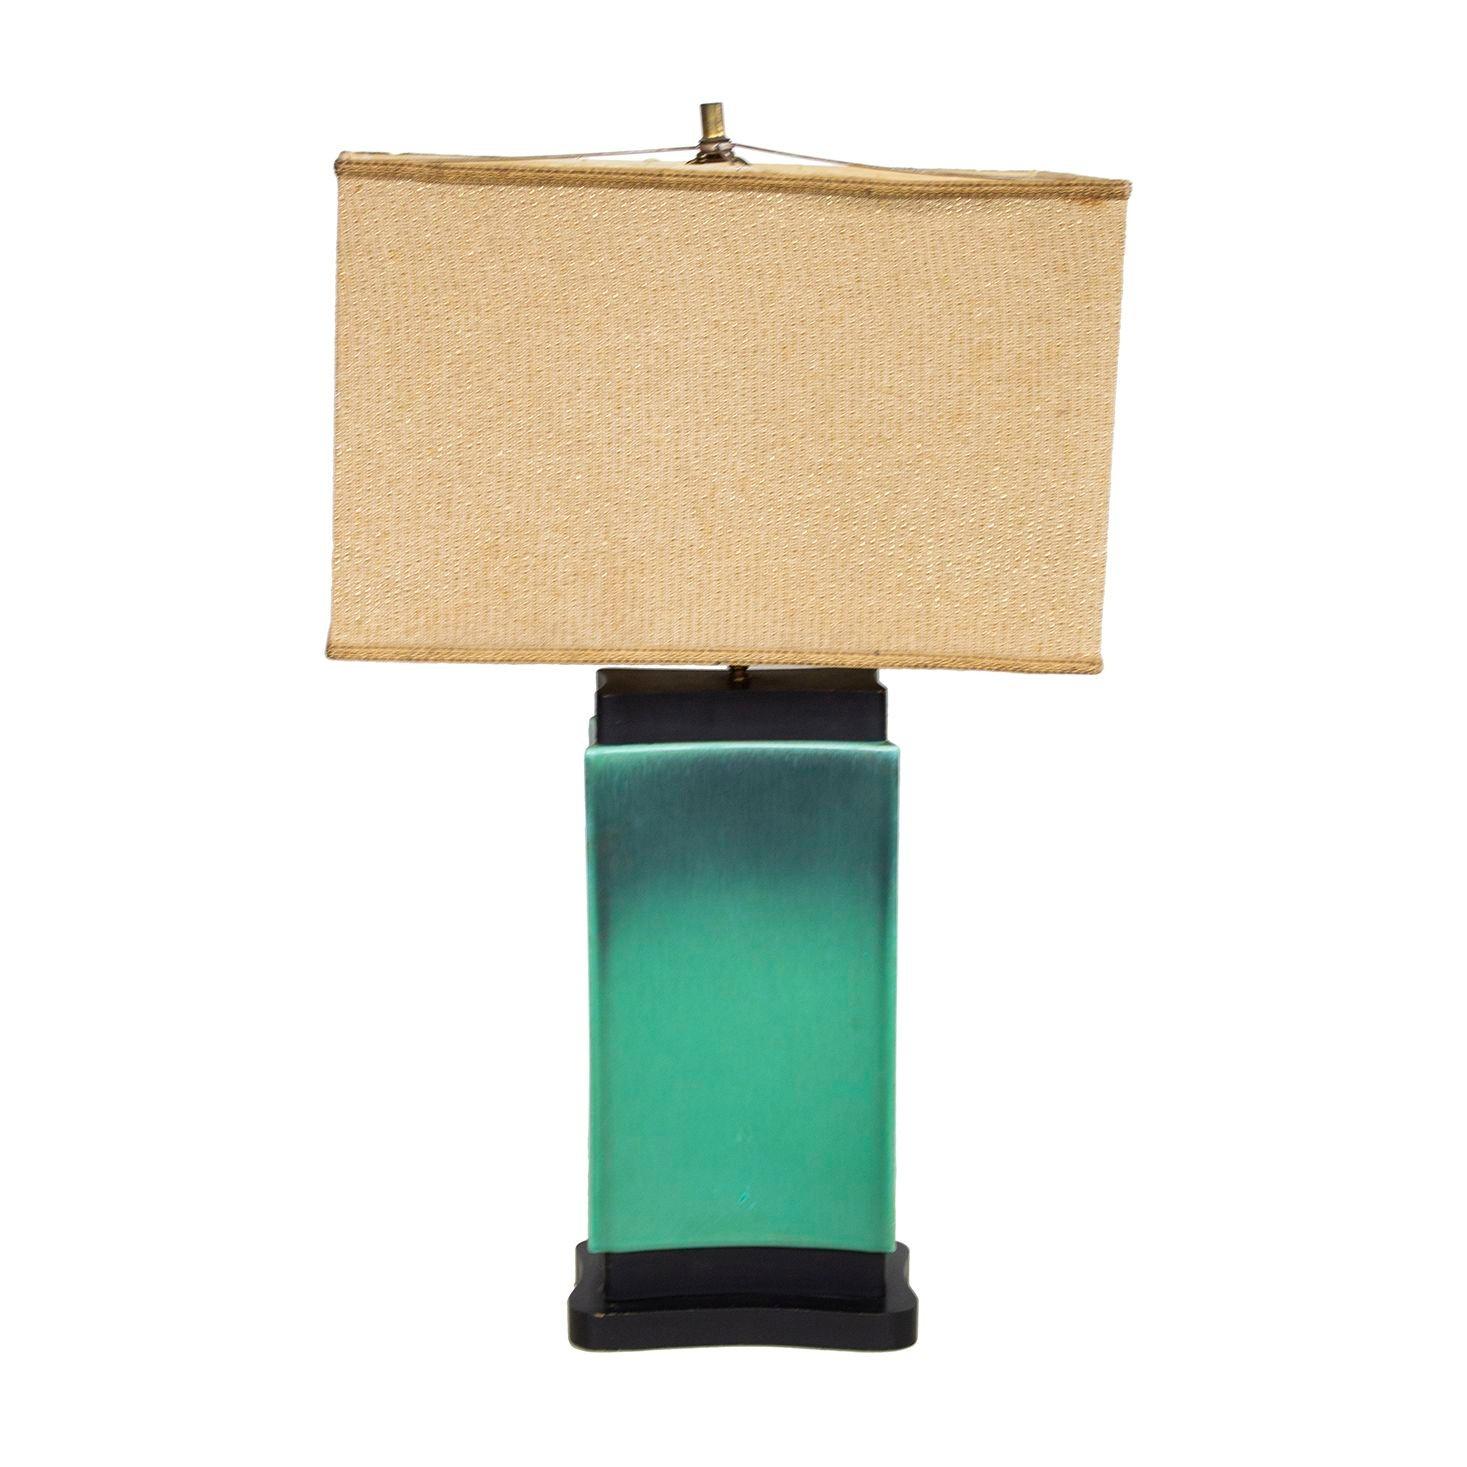 Turquoise Ombre Ceramic Art Deco Style Table Lamp For Sale 4